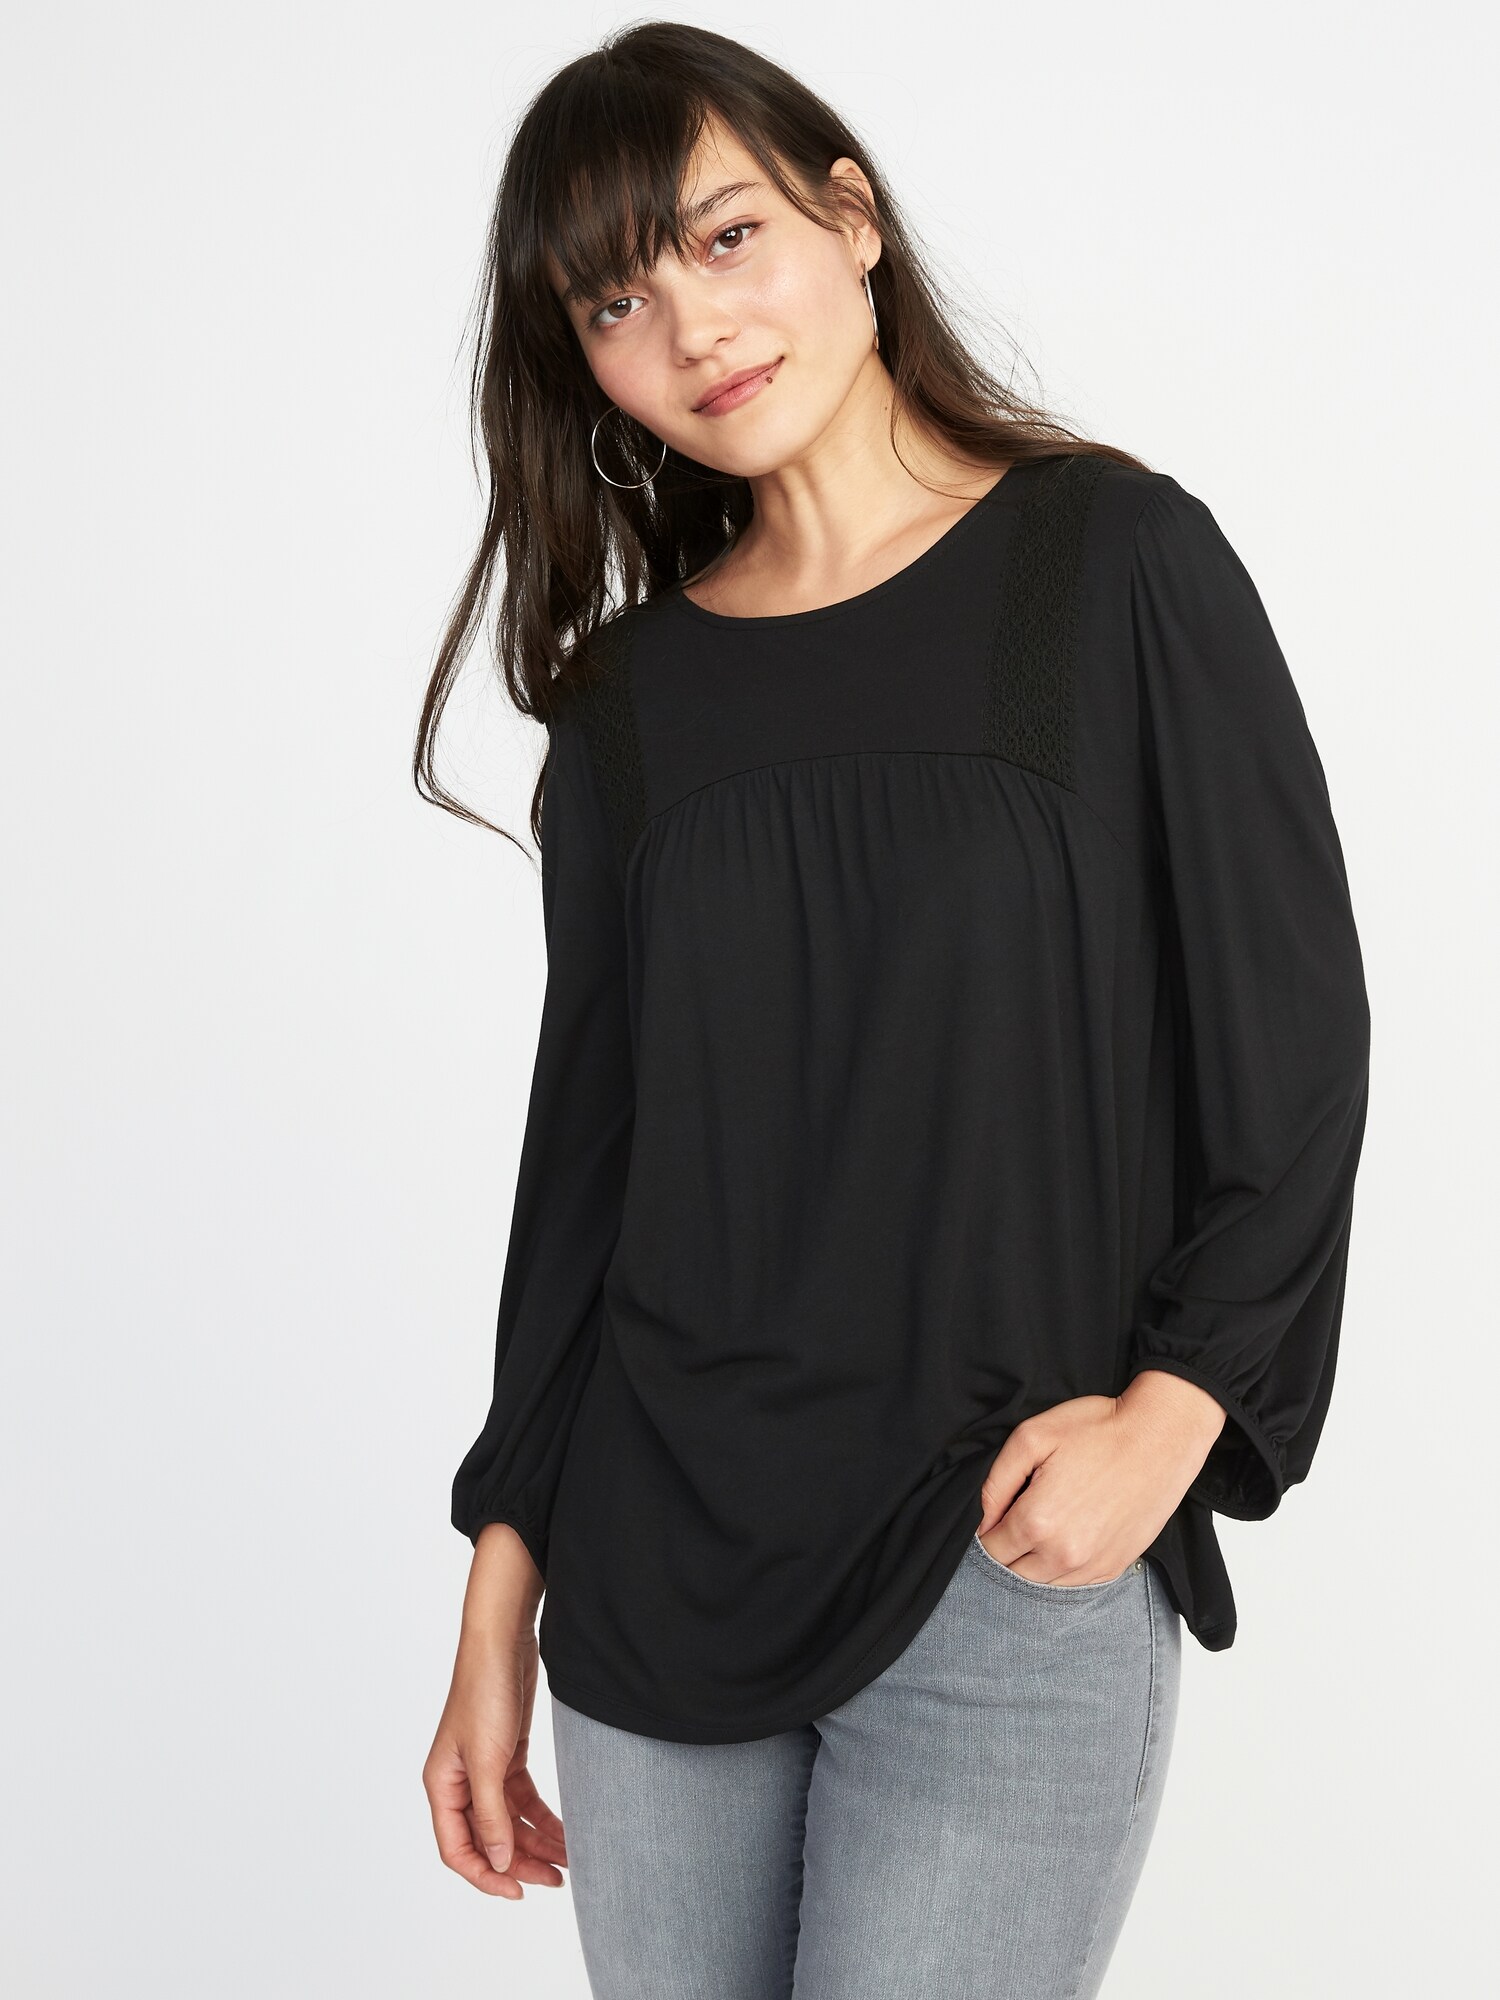 Crochet-Lace Balloon-Sleeve Jersey Top for Women | Old Navy